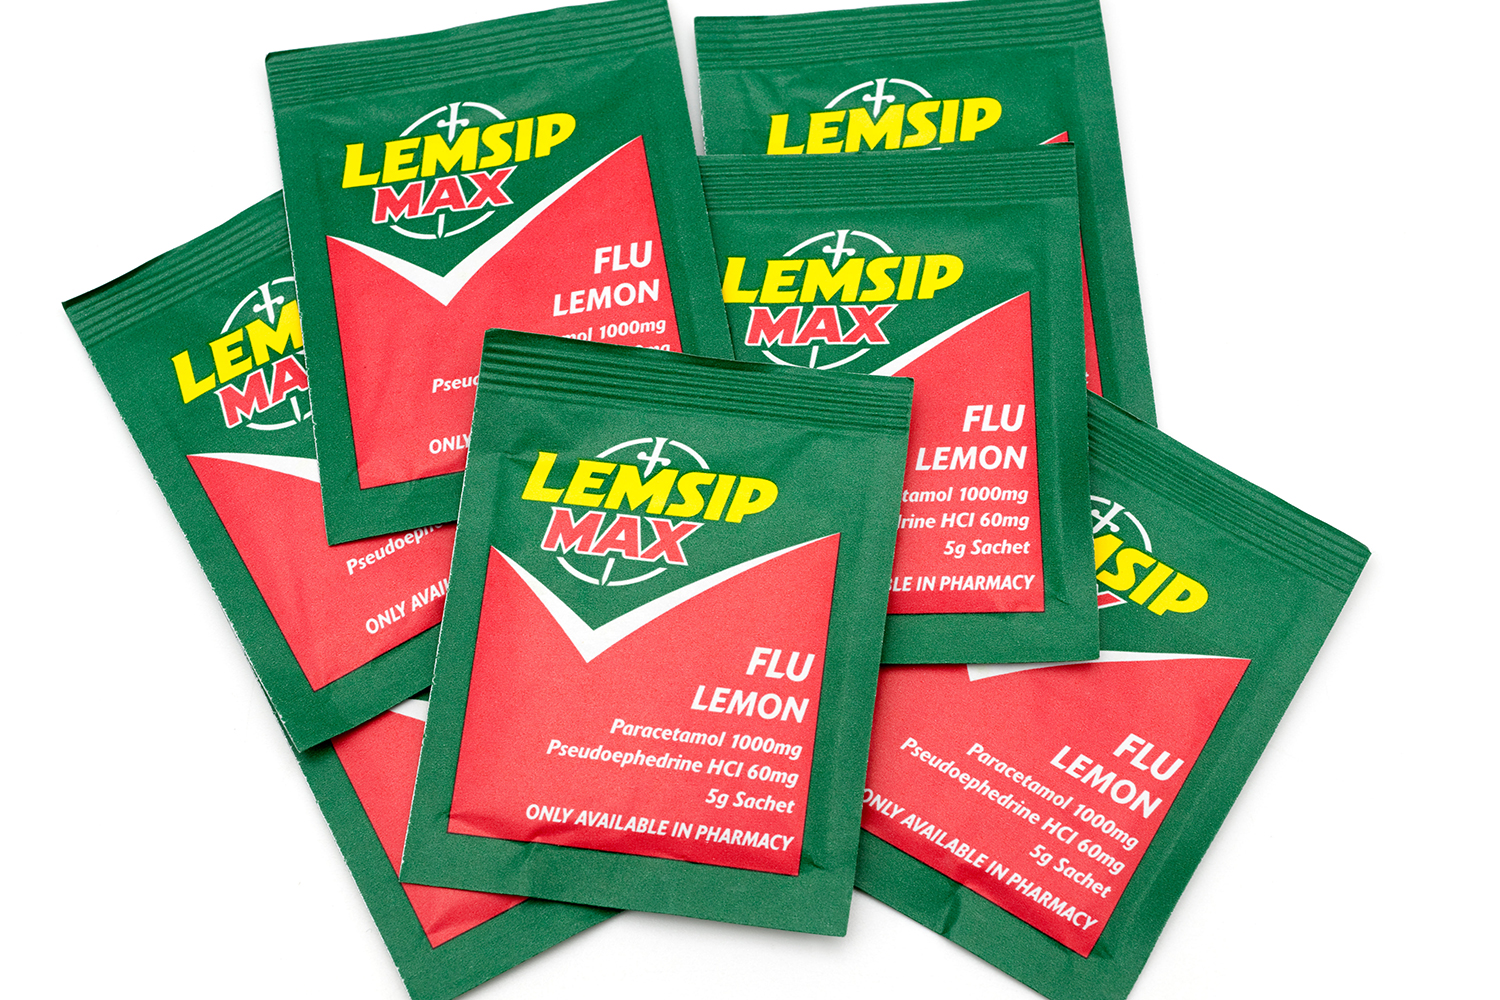 Mum dies from liver failure after accidentally overdosing on LEMSIP